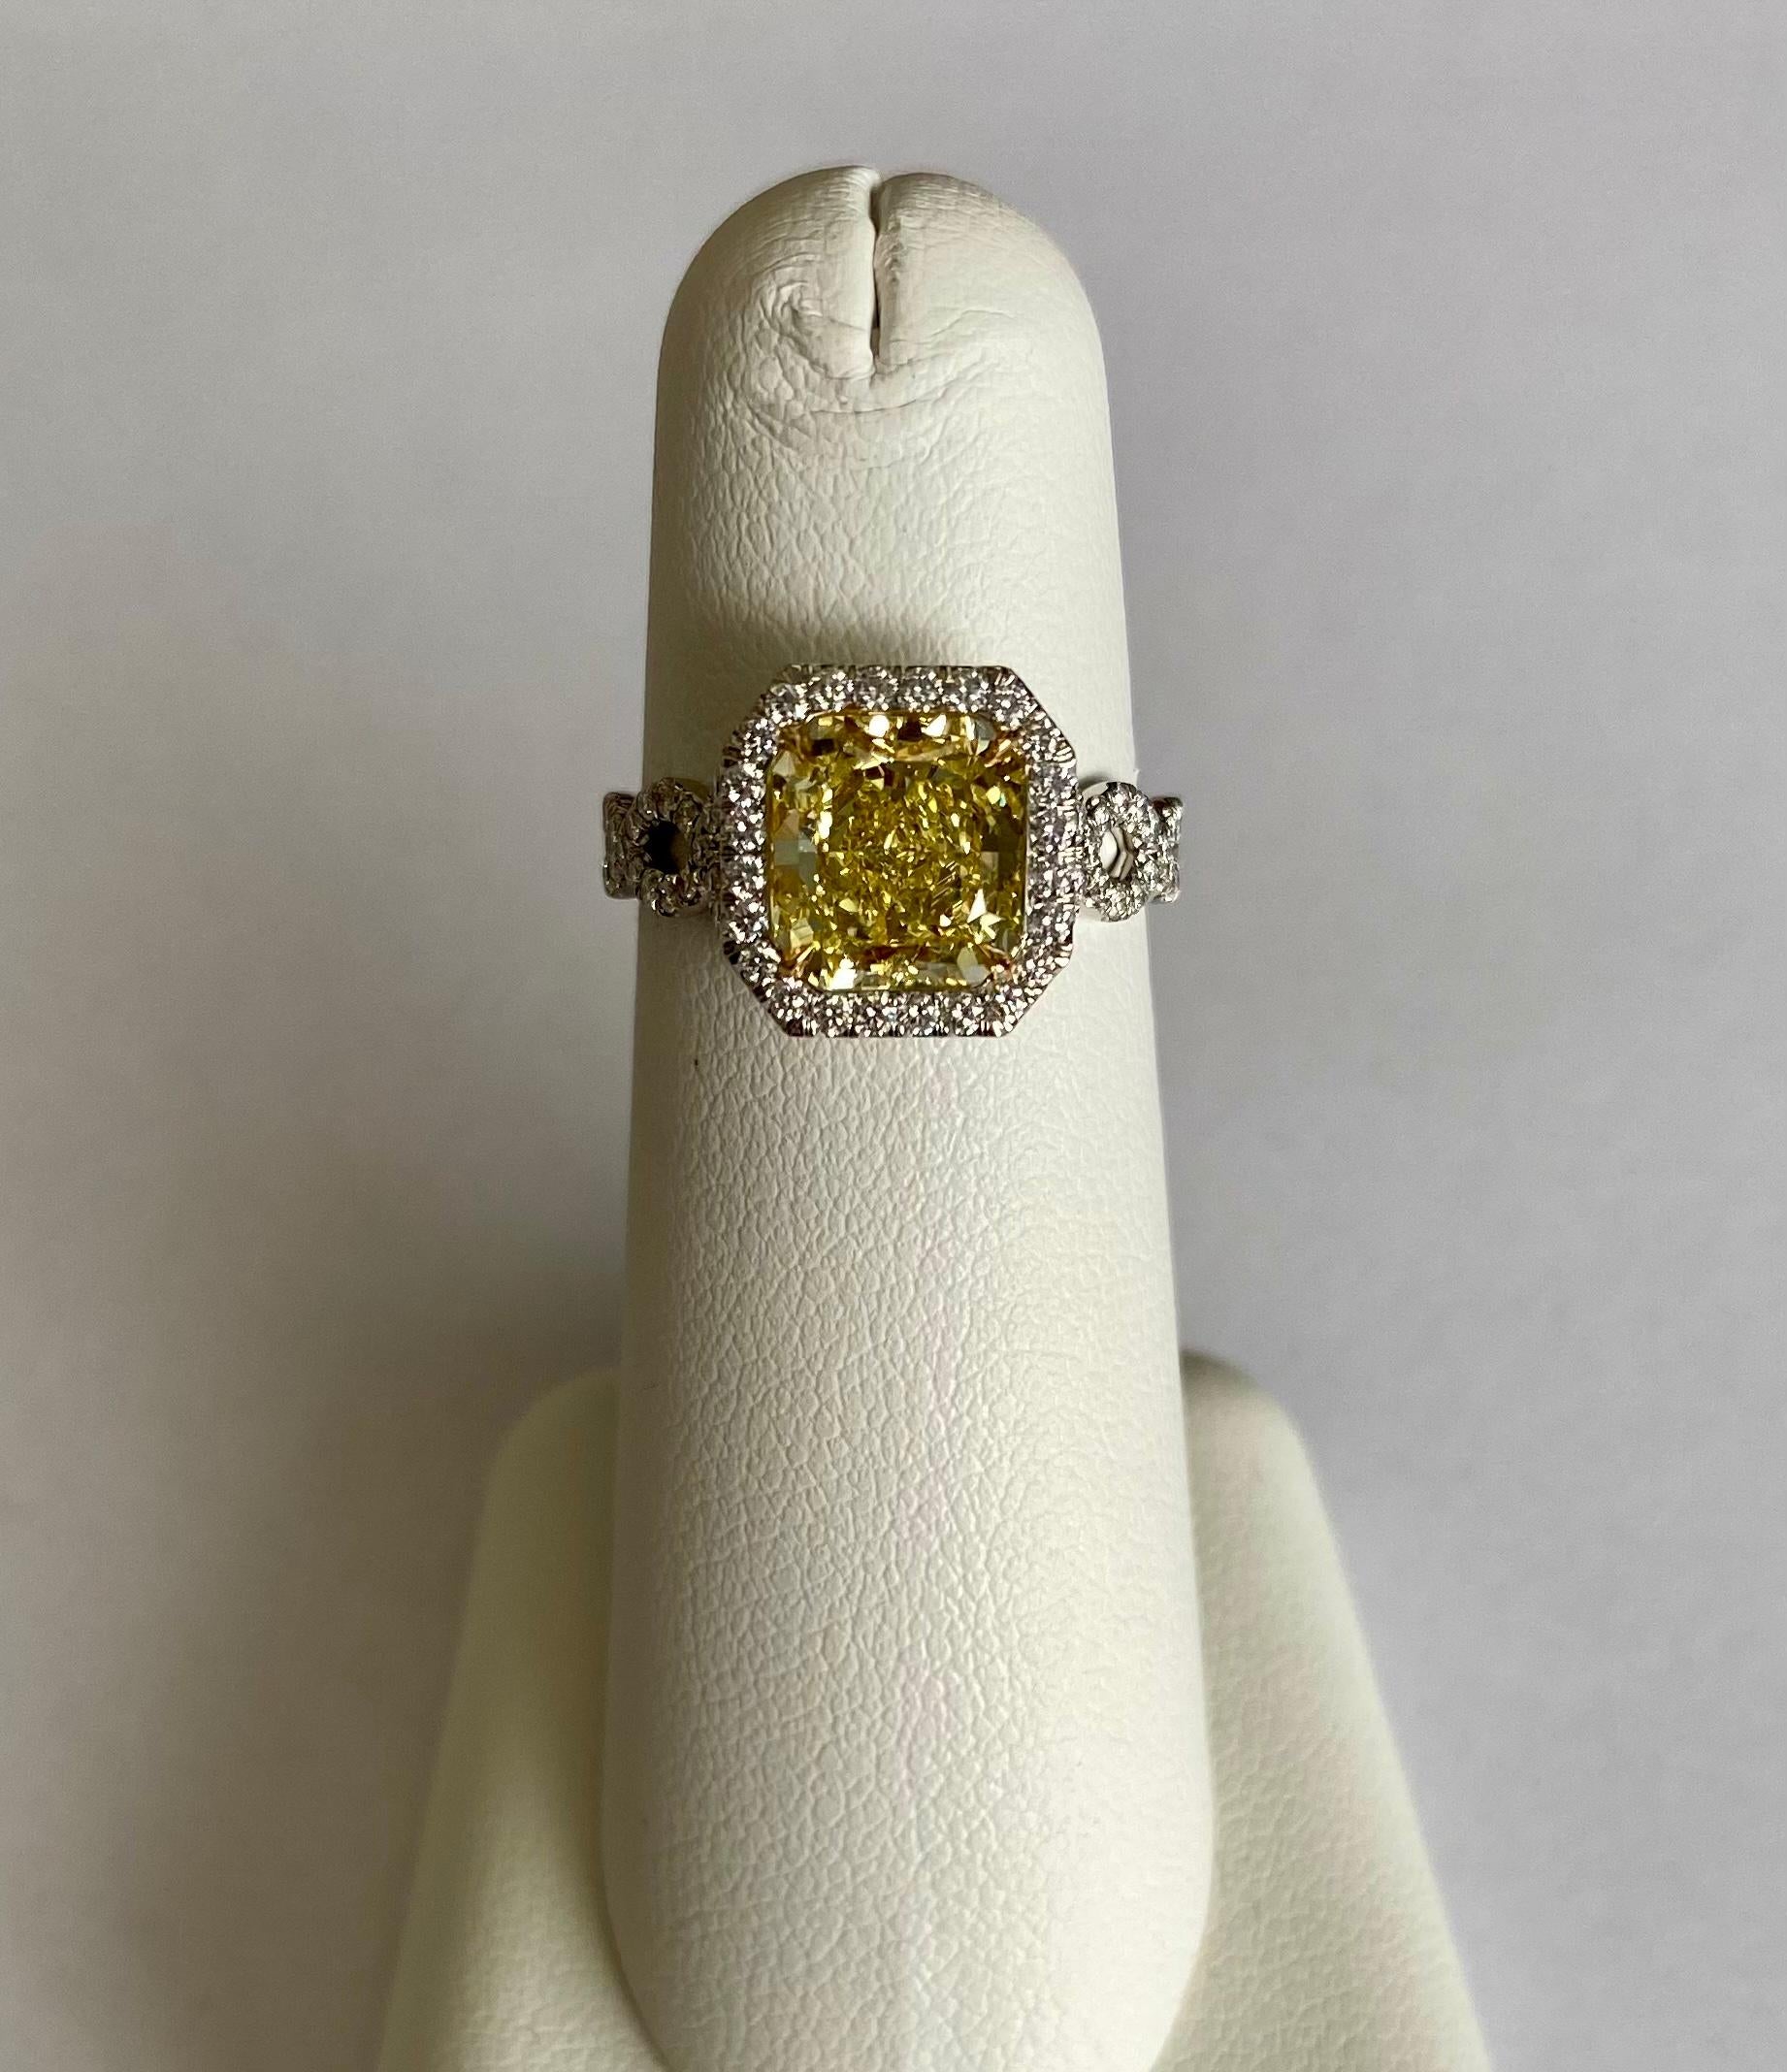 Stunning radiant cut Fancy Intense Yellow VS2 weighting 2.23 carats (GIA 2185057032) set in handmade platinum ring with 89  round brilliant cut diamonds D-E-F color VS clarity, DTW. 0.48ct, finger size 6.

Viewings available in our NYC wholesale